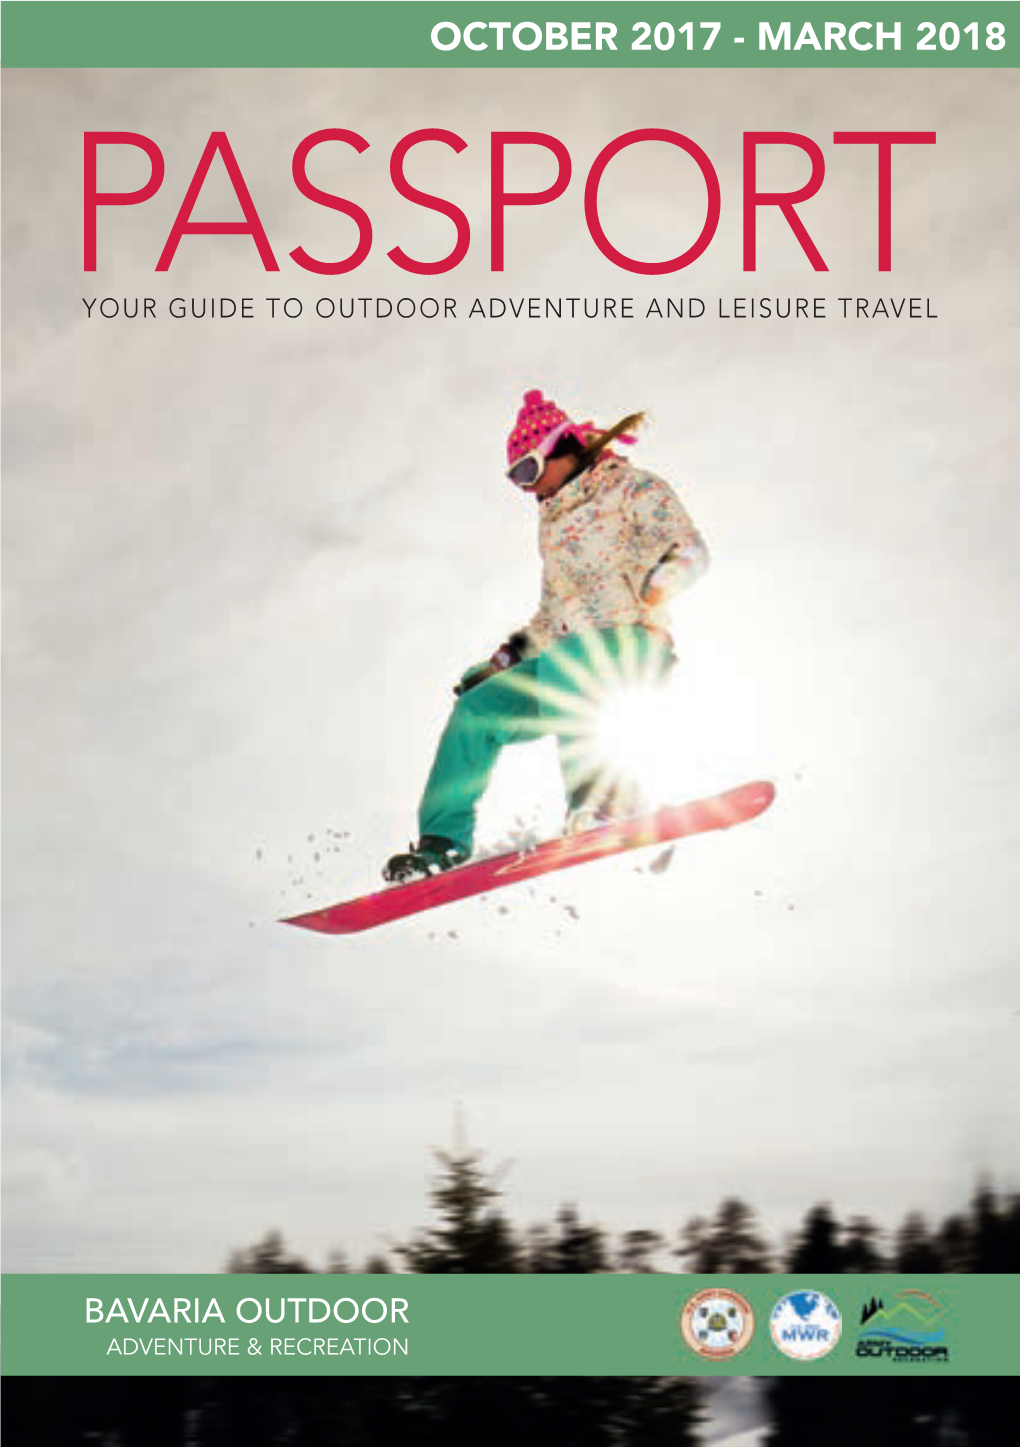 October 2017 - March 2018 Passport Your Guide to Outdoor Adventure and Leisure Travel